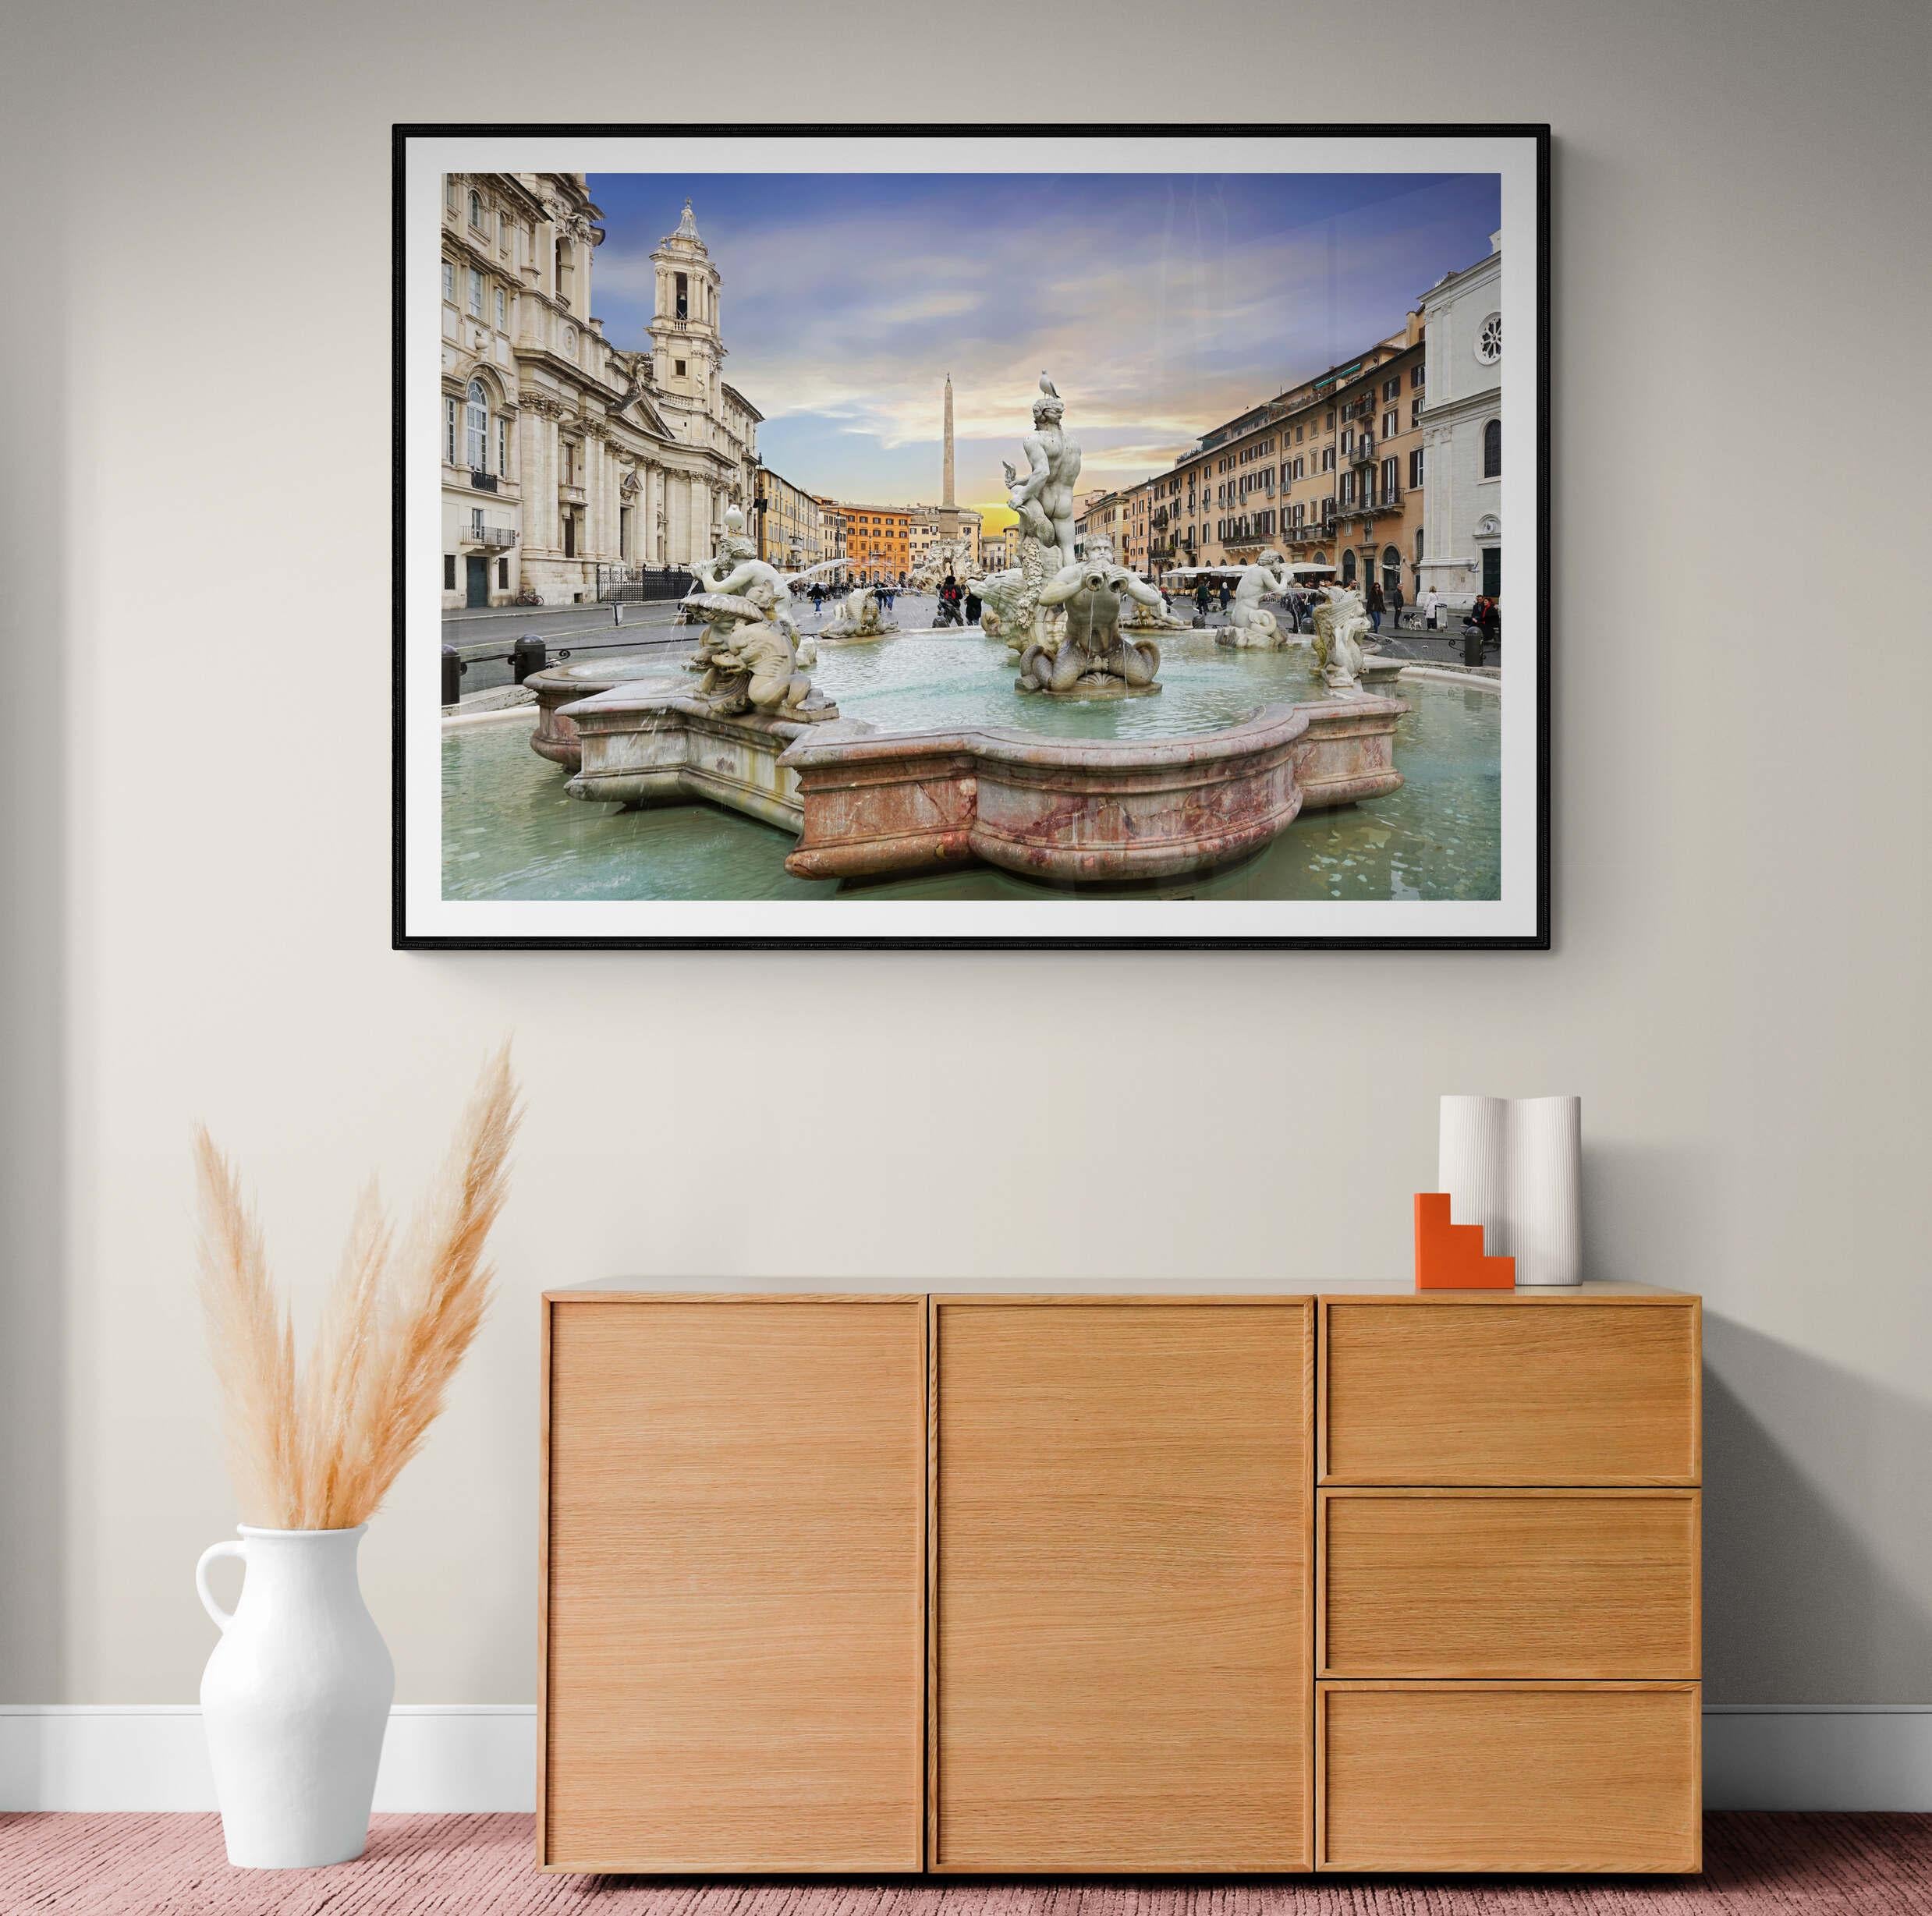 The Piazza Navona, Roma - Italy 2019 - Full Framed Panoramic Color Photography For Sale 4